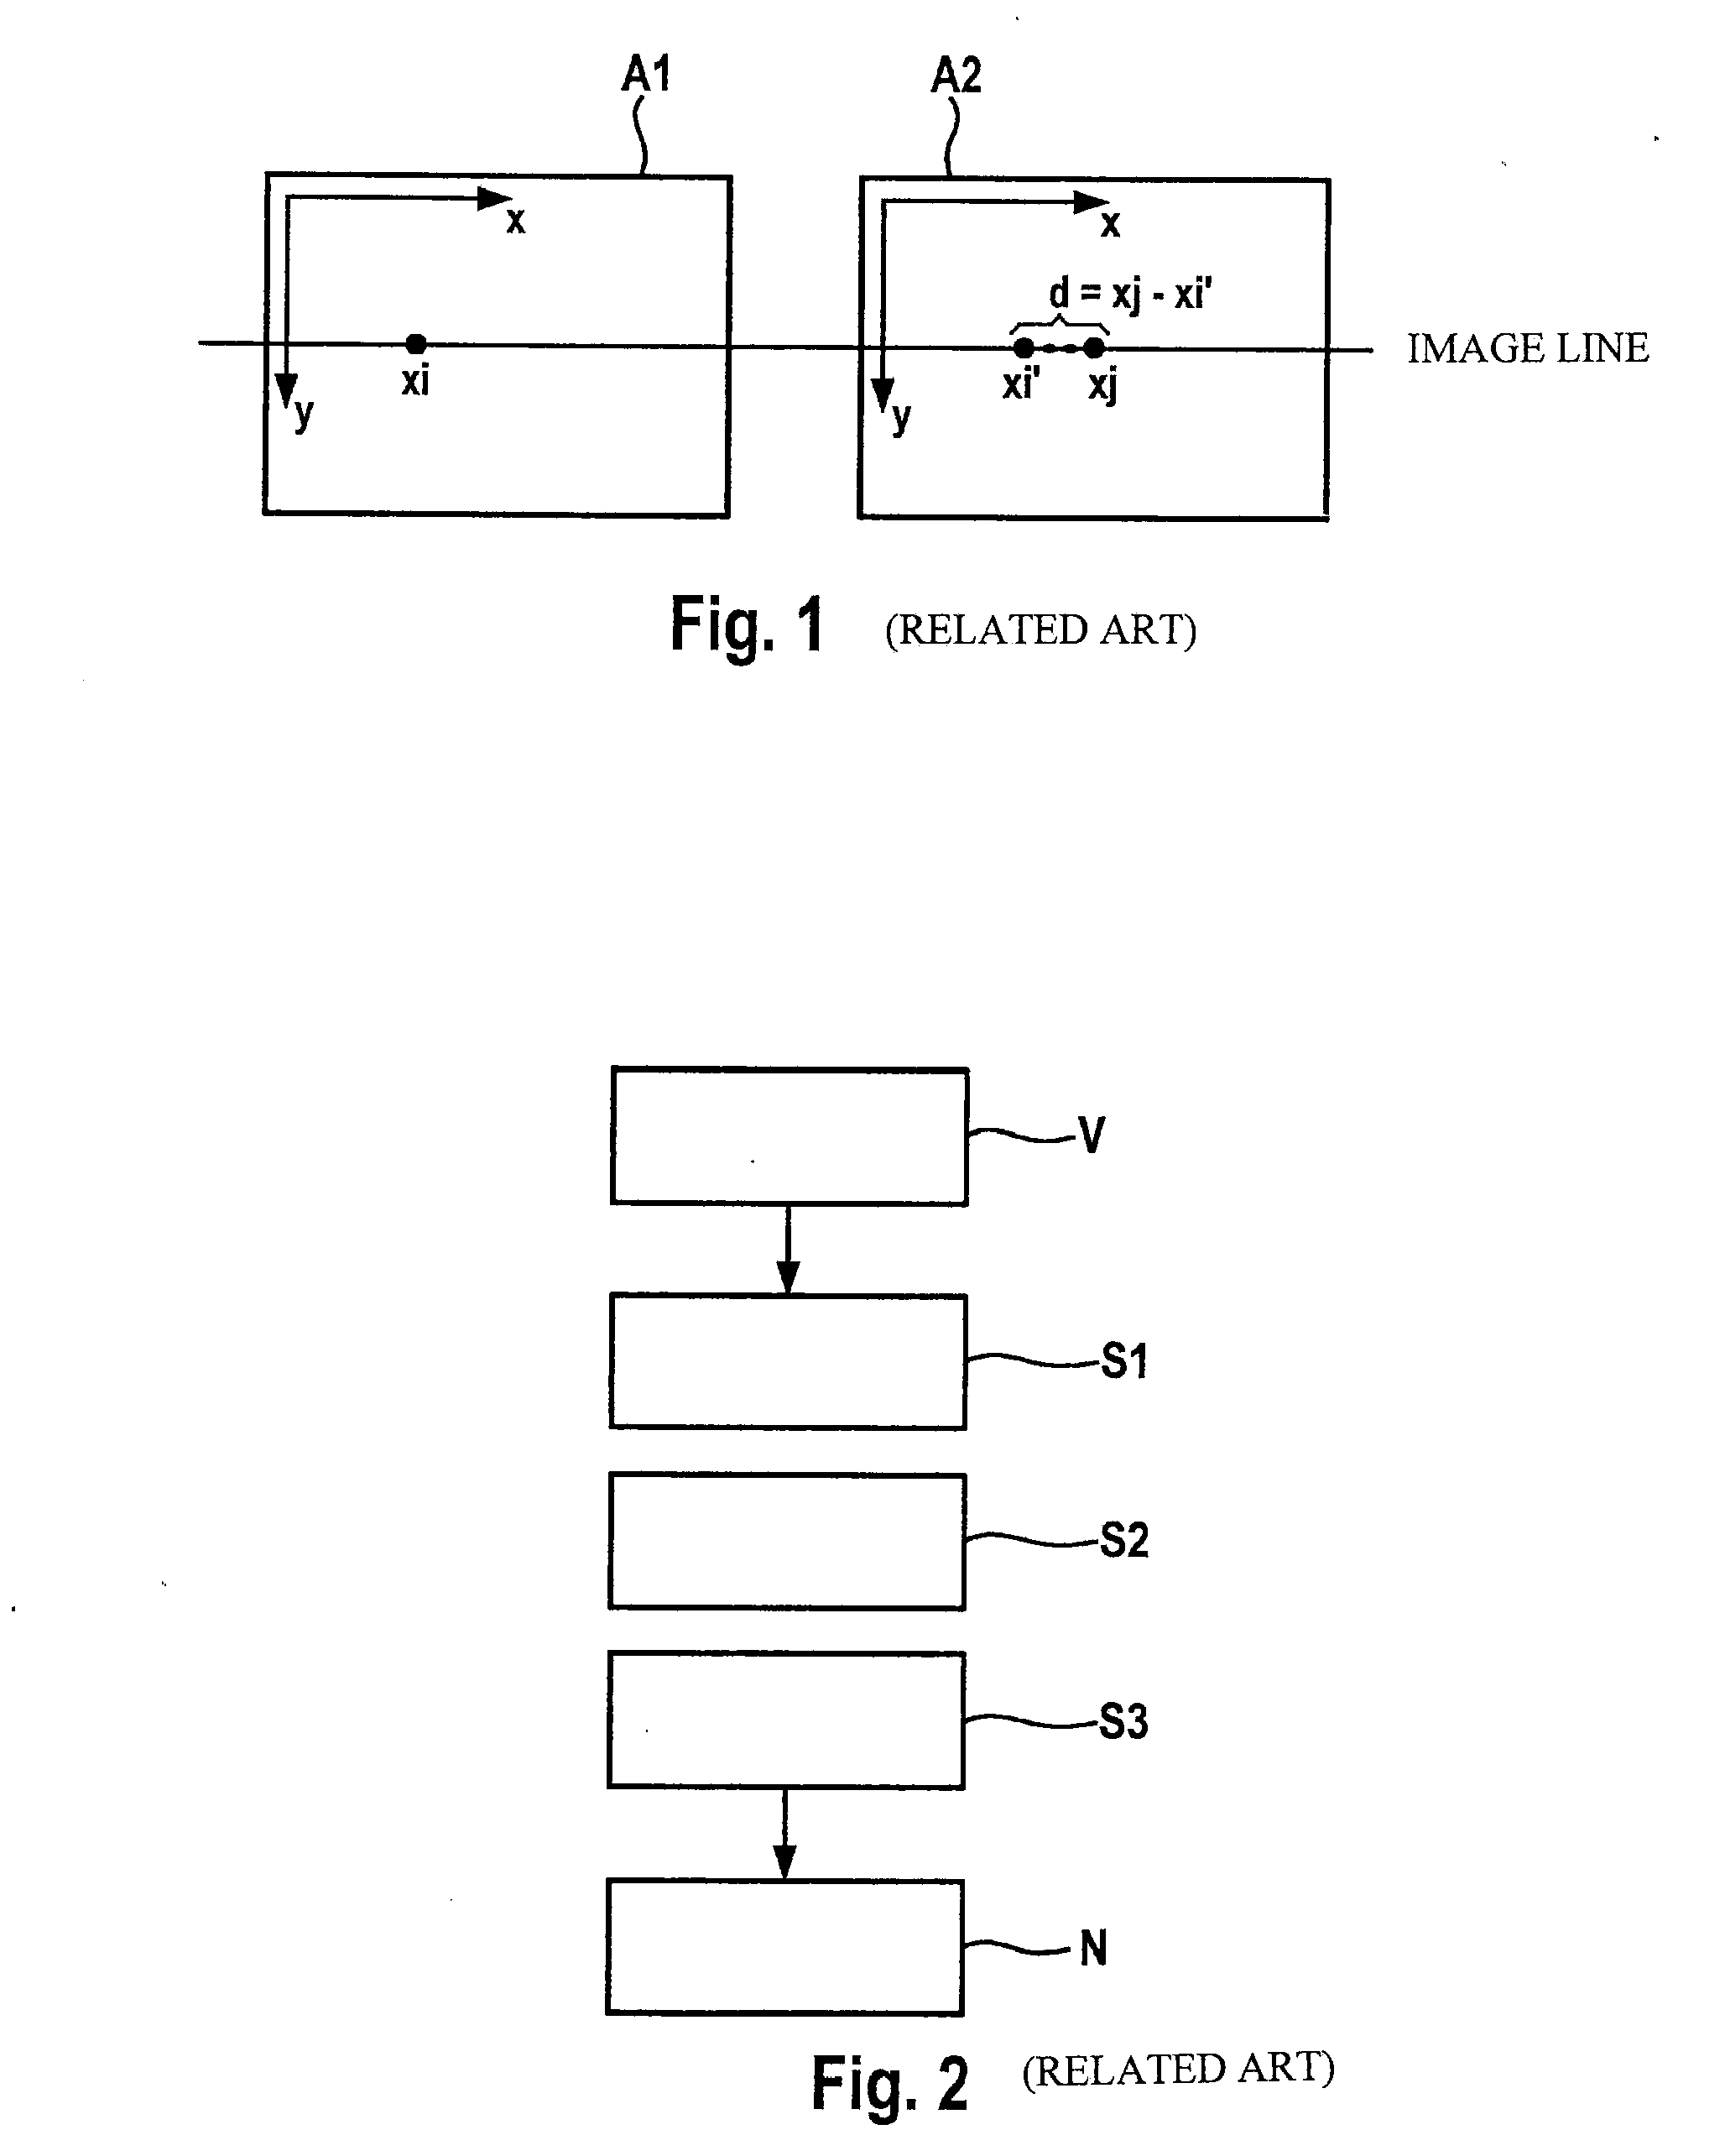 Image processing method for determining depth information from at least two input images recorded with the aid of a stereo camera system